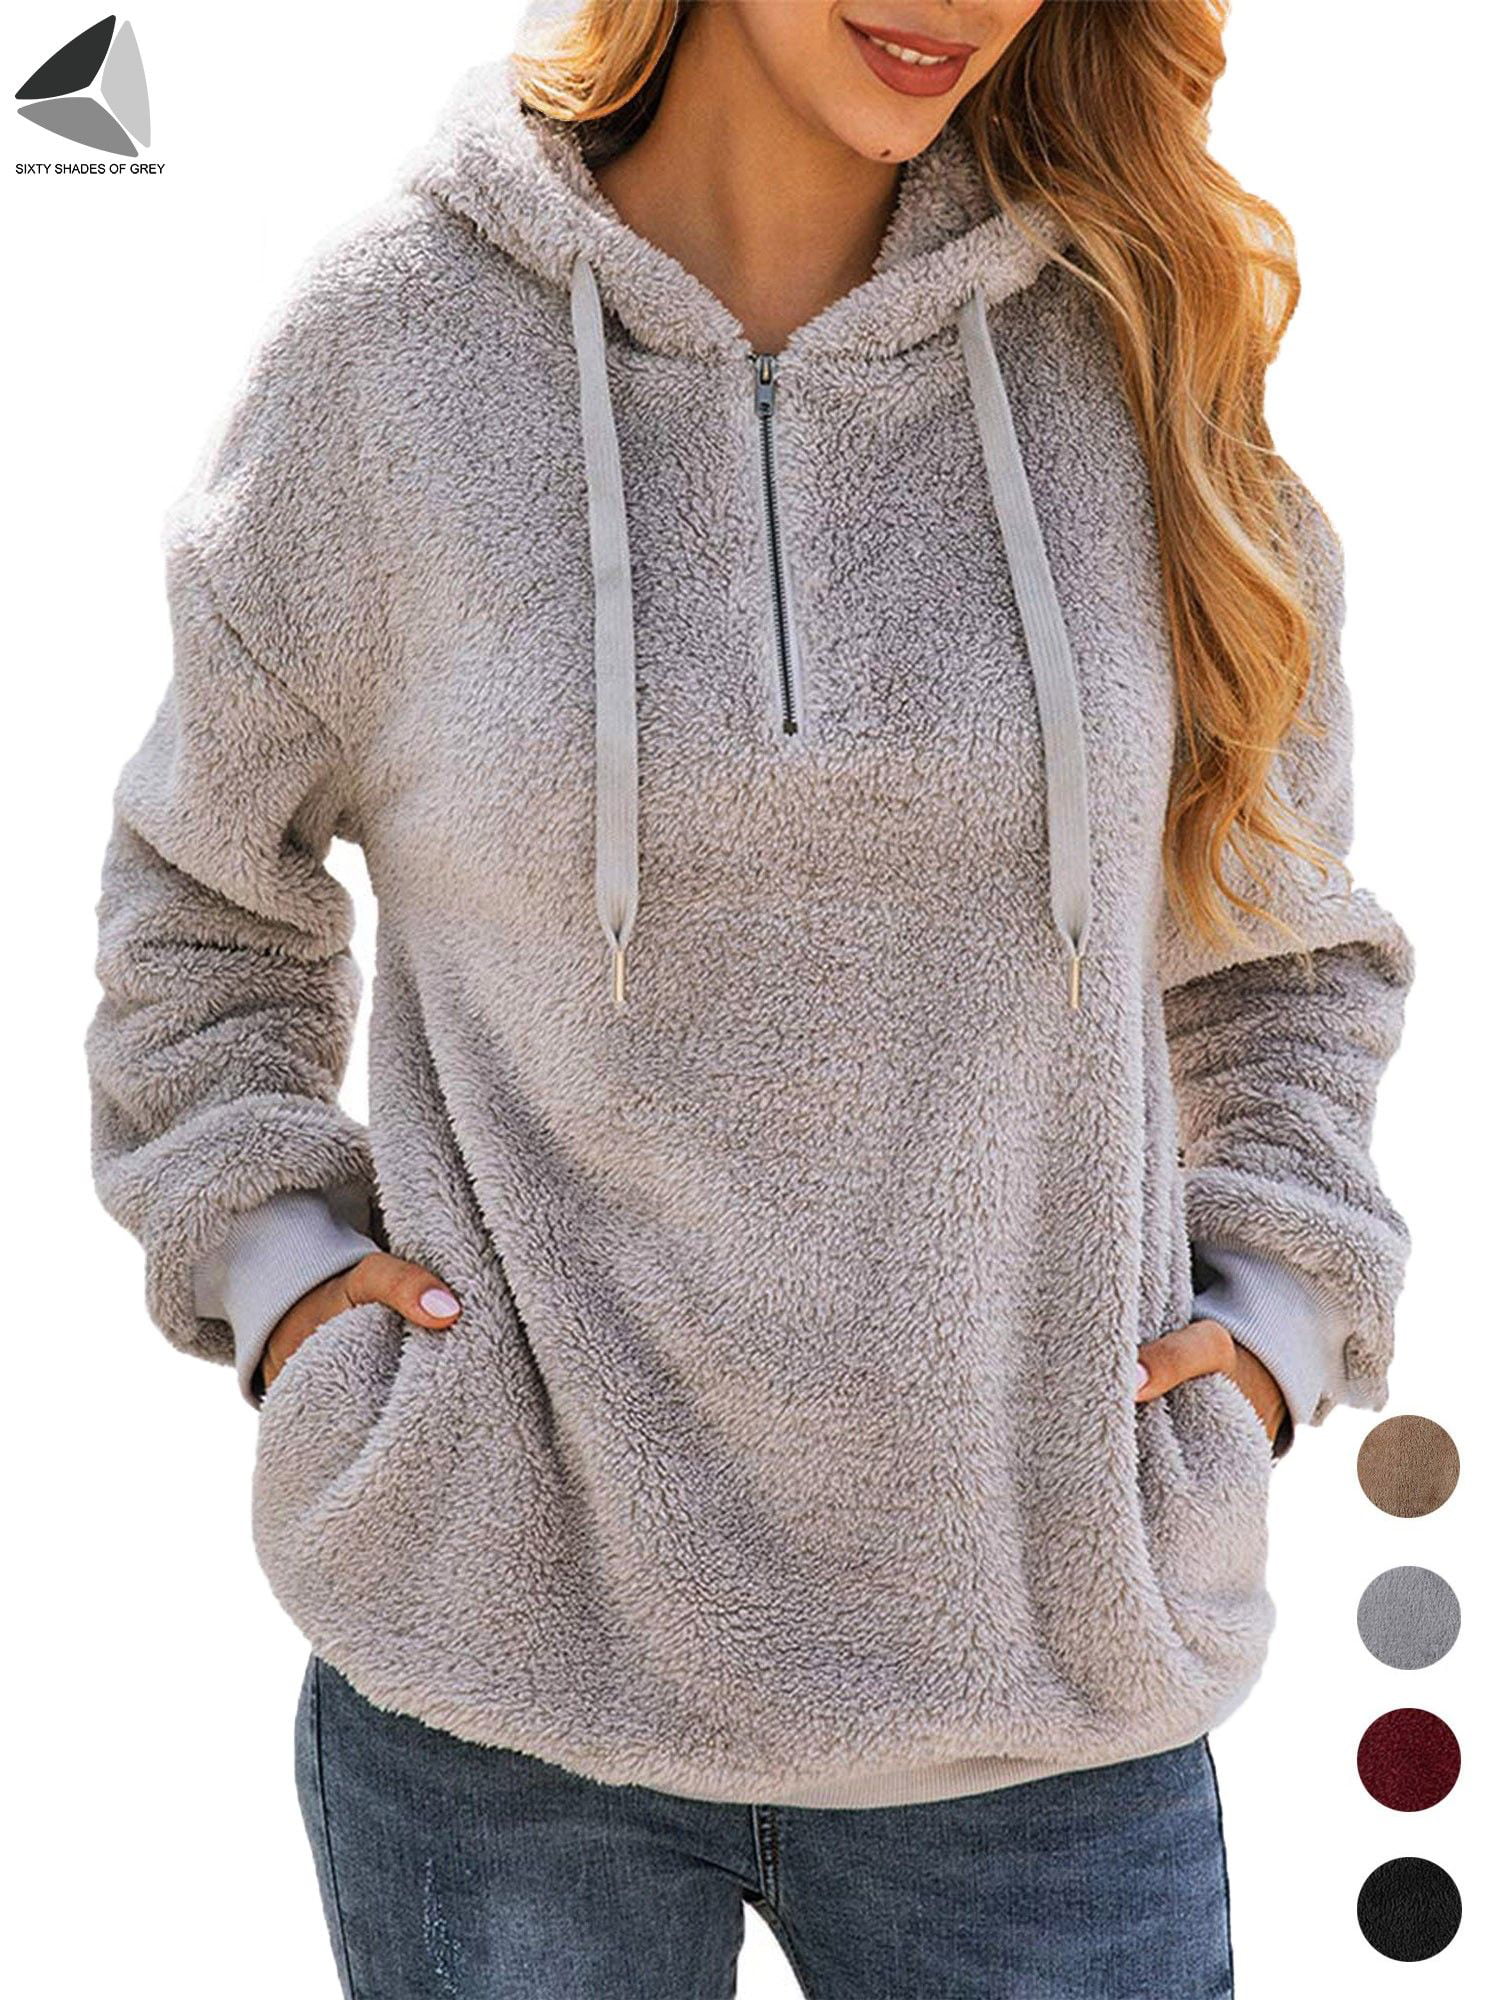 Bwiv Womens Baggy Fluffy Pullover Hoodie with 1/4 Zipper and Drawstring for Winter Ladies Long Sleeves Sweatshirt Soft Tops Teddy Fleece 